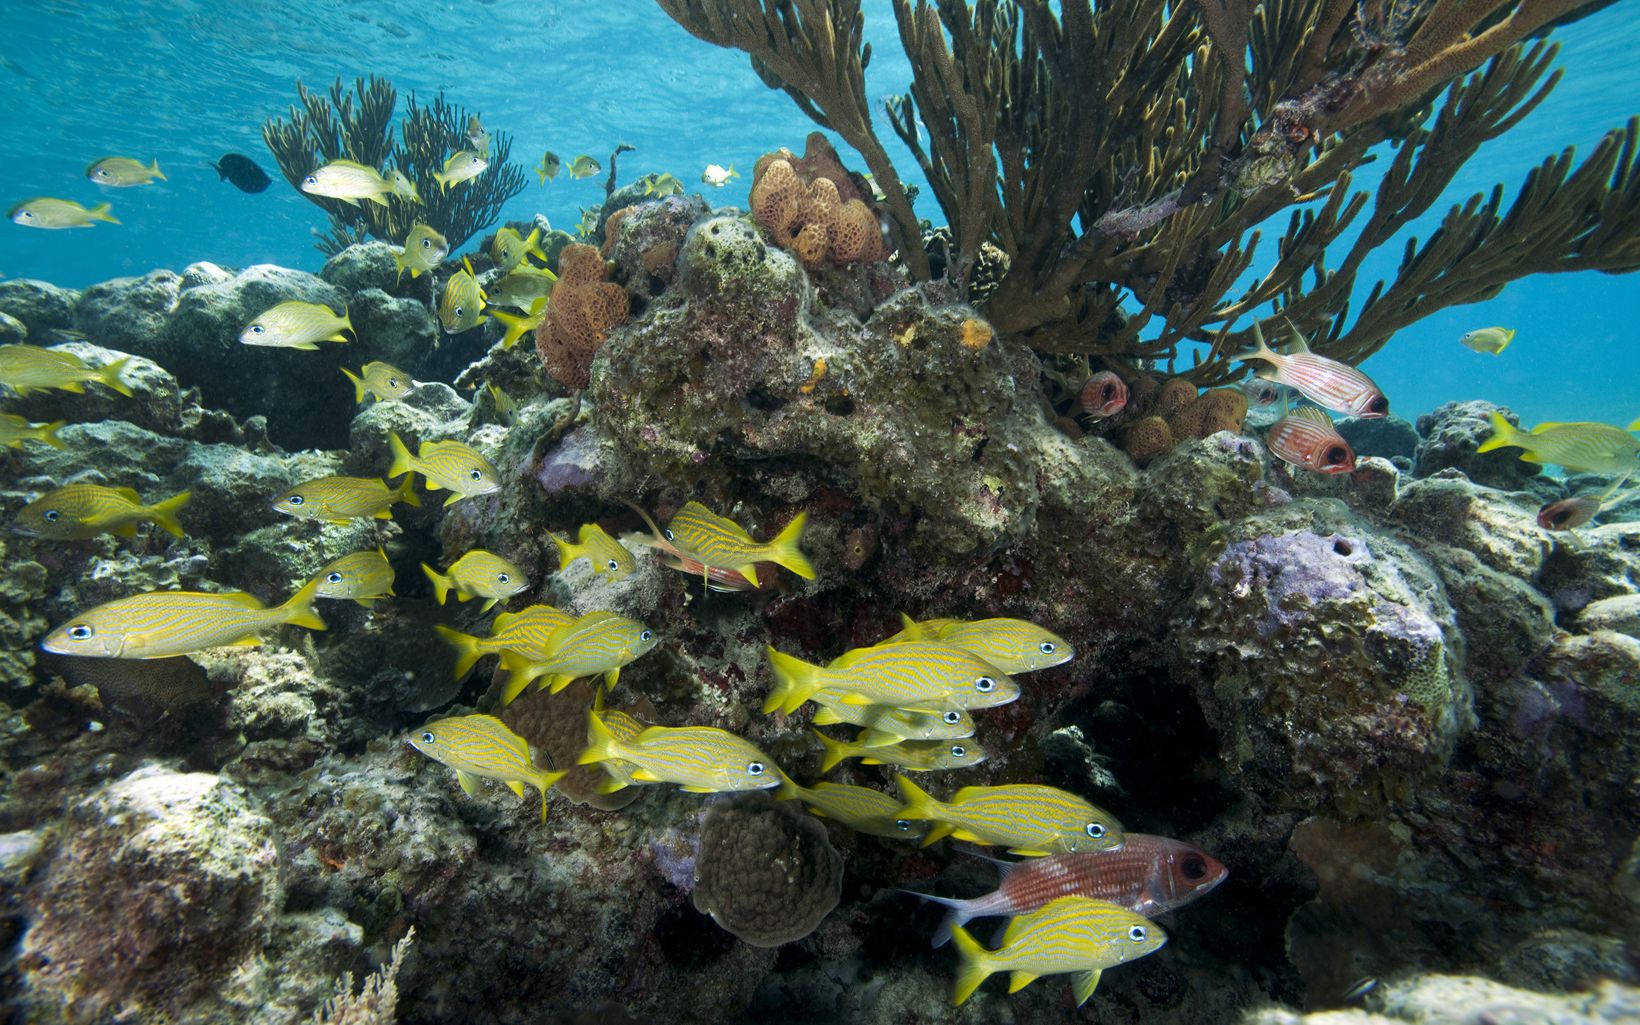 Reef fish The Park draws thousands of visitors each year and its stunning reefs and pristine beaches support thriving tourism-based businesses. © Jeff Yonover